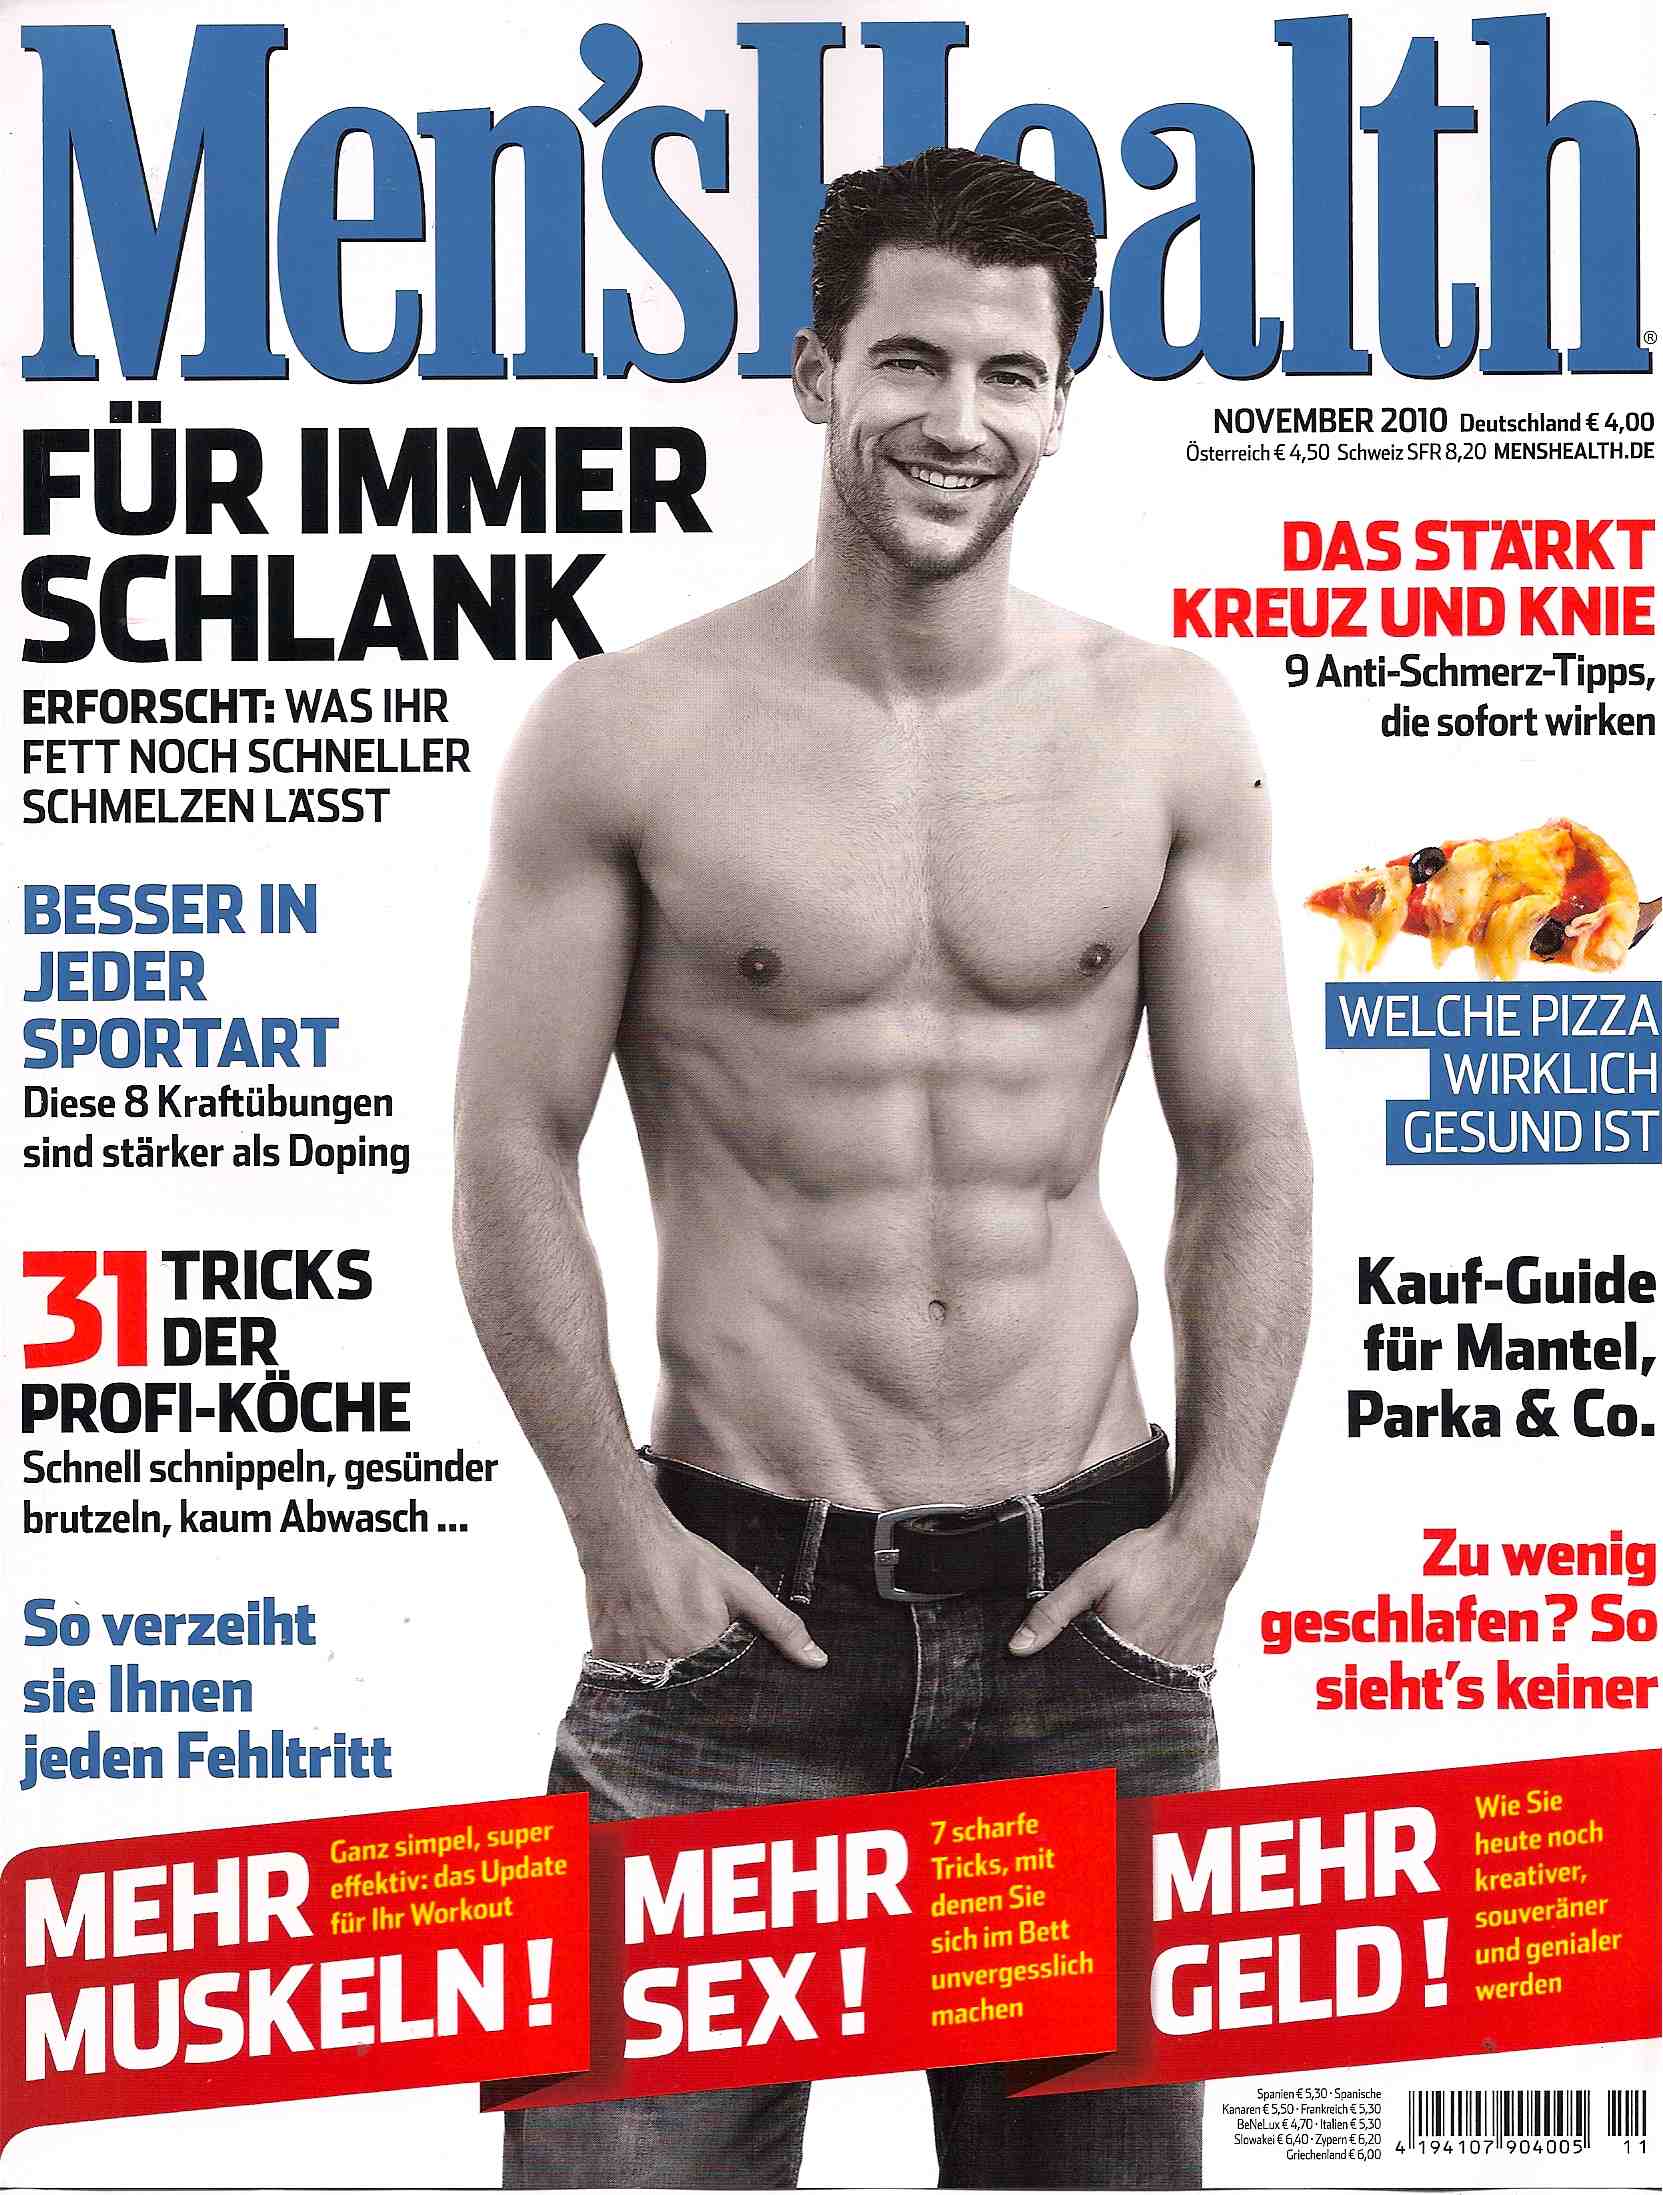  Health on German Men   S Health Featuring Red Wing Shoes    Red Wing Lifestyle